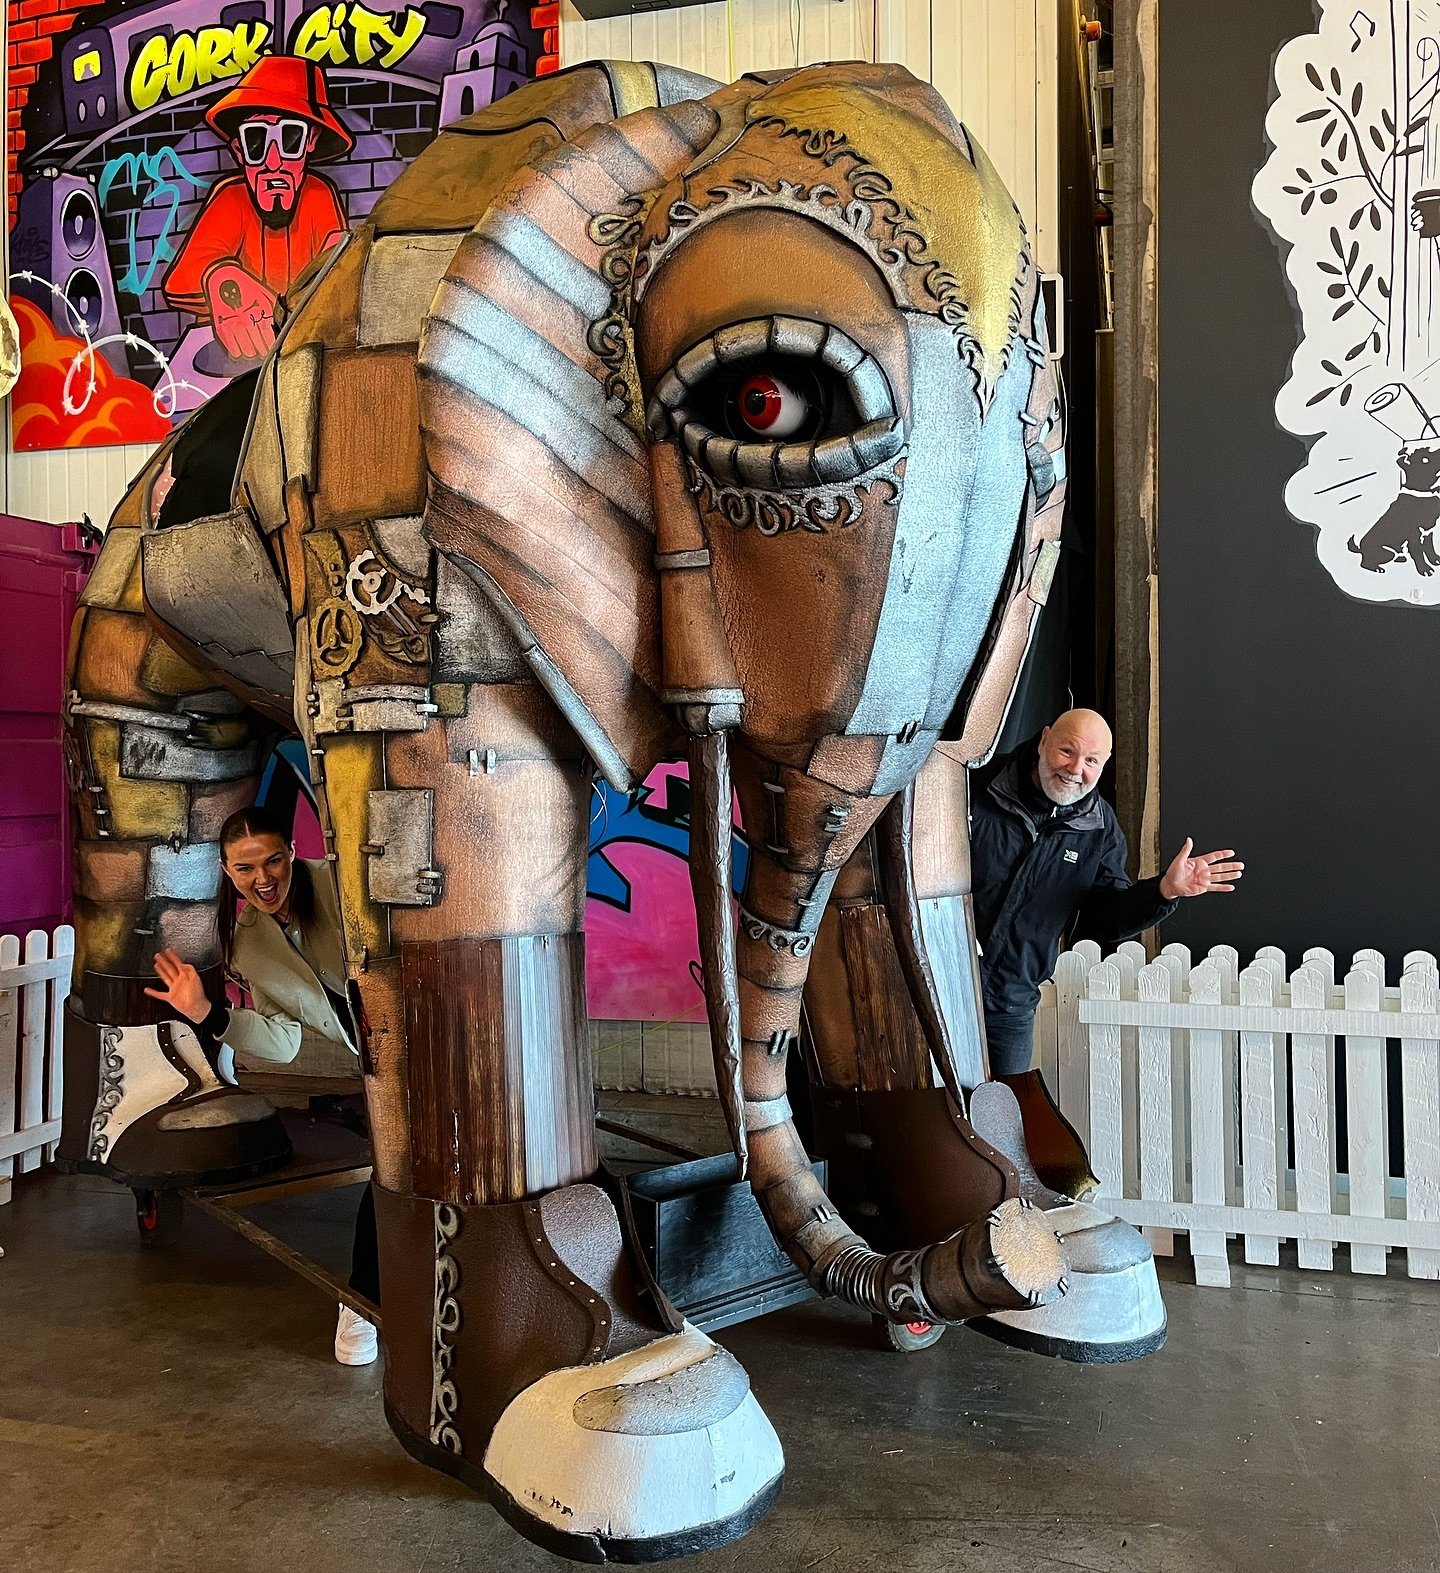 We want YOU to help us find the perfect name for our newest addition, our life size elephant!

Head over to our stories and pop your suggestions in the question box and the best name will win a &euro;50 voucher for the Marina Market! 🦣